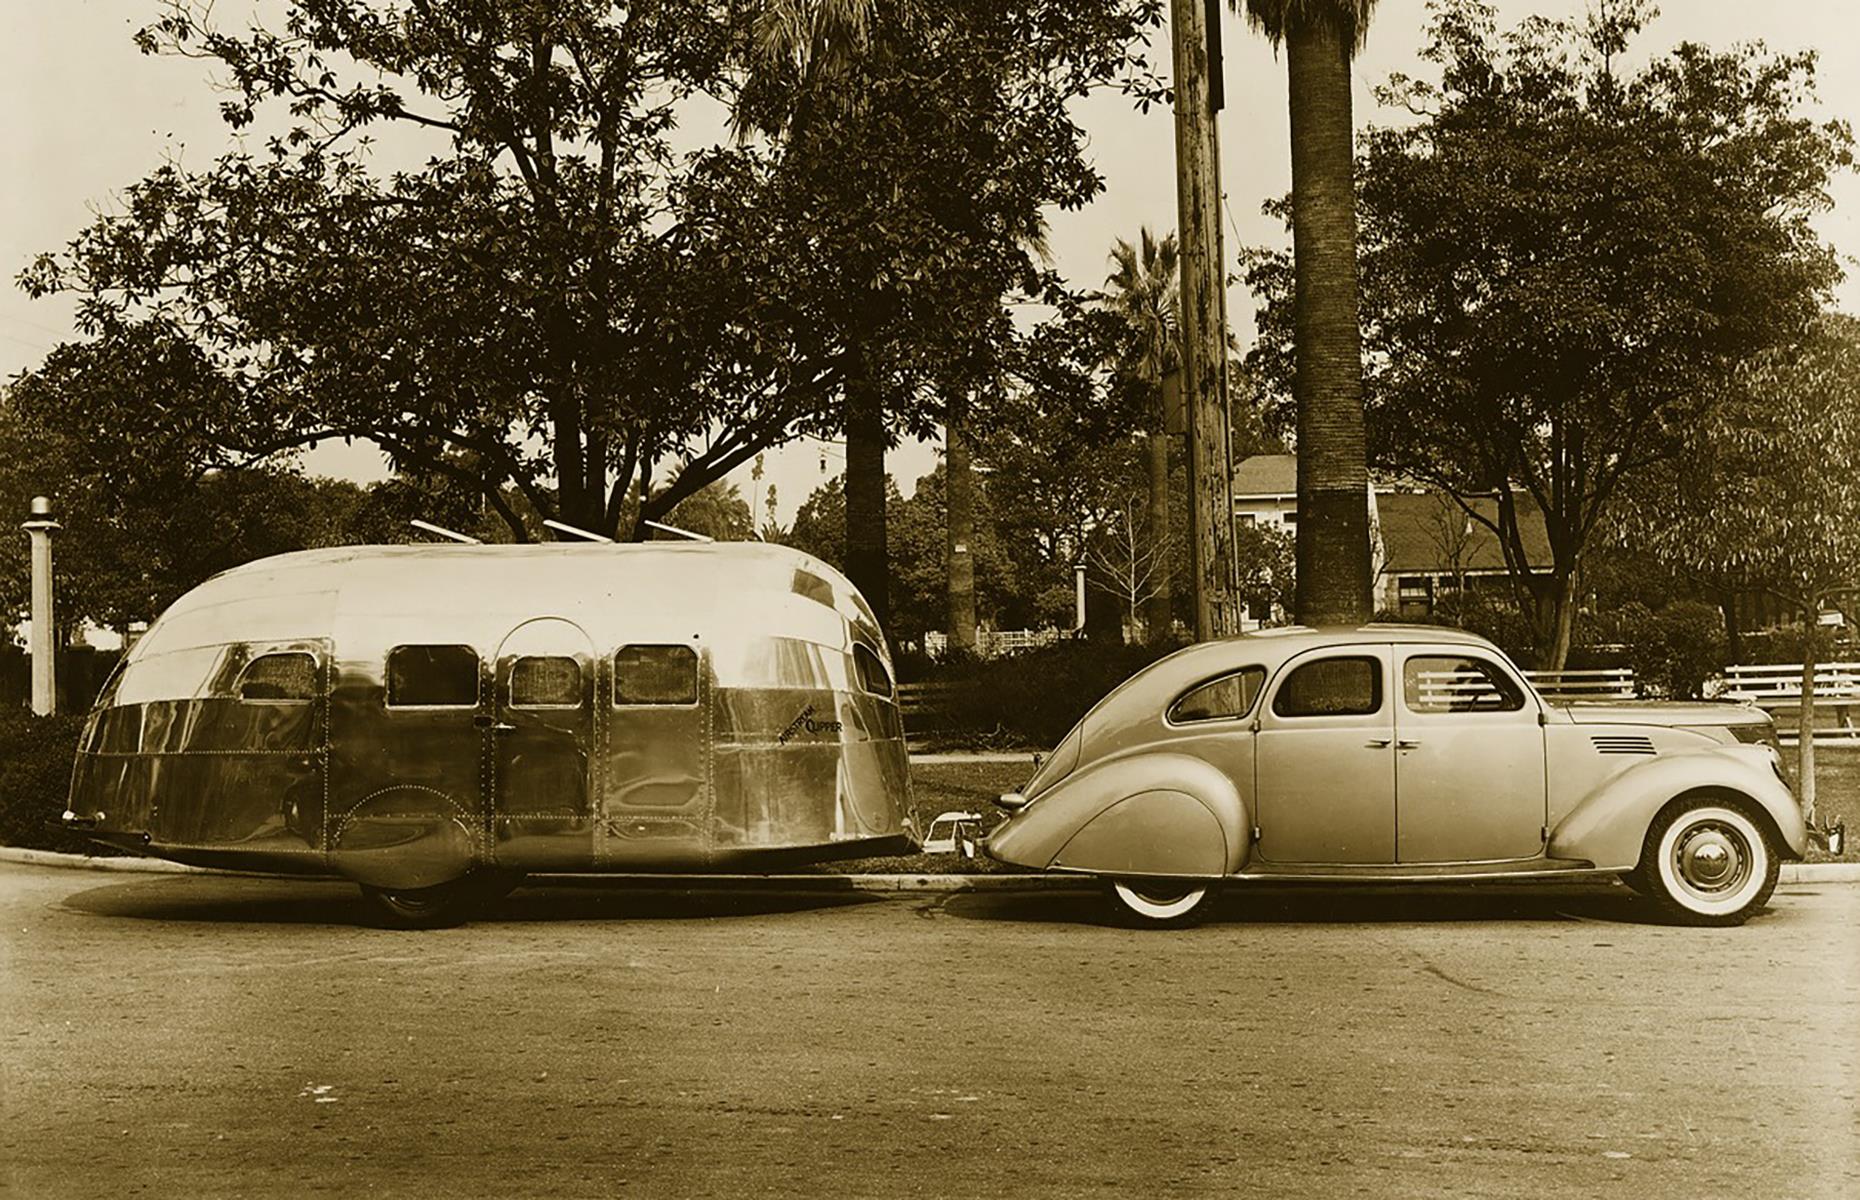 <p>Bowlus' aircraft-inspired RVs failed to sell so in 1936 Byam stepped in and bought up Bowlus' inventory. Byam reconfigured the Road Chief, creating the iconic Airstream Clipper, and put his marketing and advertising skills to good use. Sales of the Clipper went through the roof, despite the trailer's hefty $1,200 price tag – that's equivalent to around $25,000 today. The interior of the 1936 model was designed to be cozy and comfortable, with leather seating, solid wood cabinets and a cocoon-like ceiling.</p>